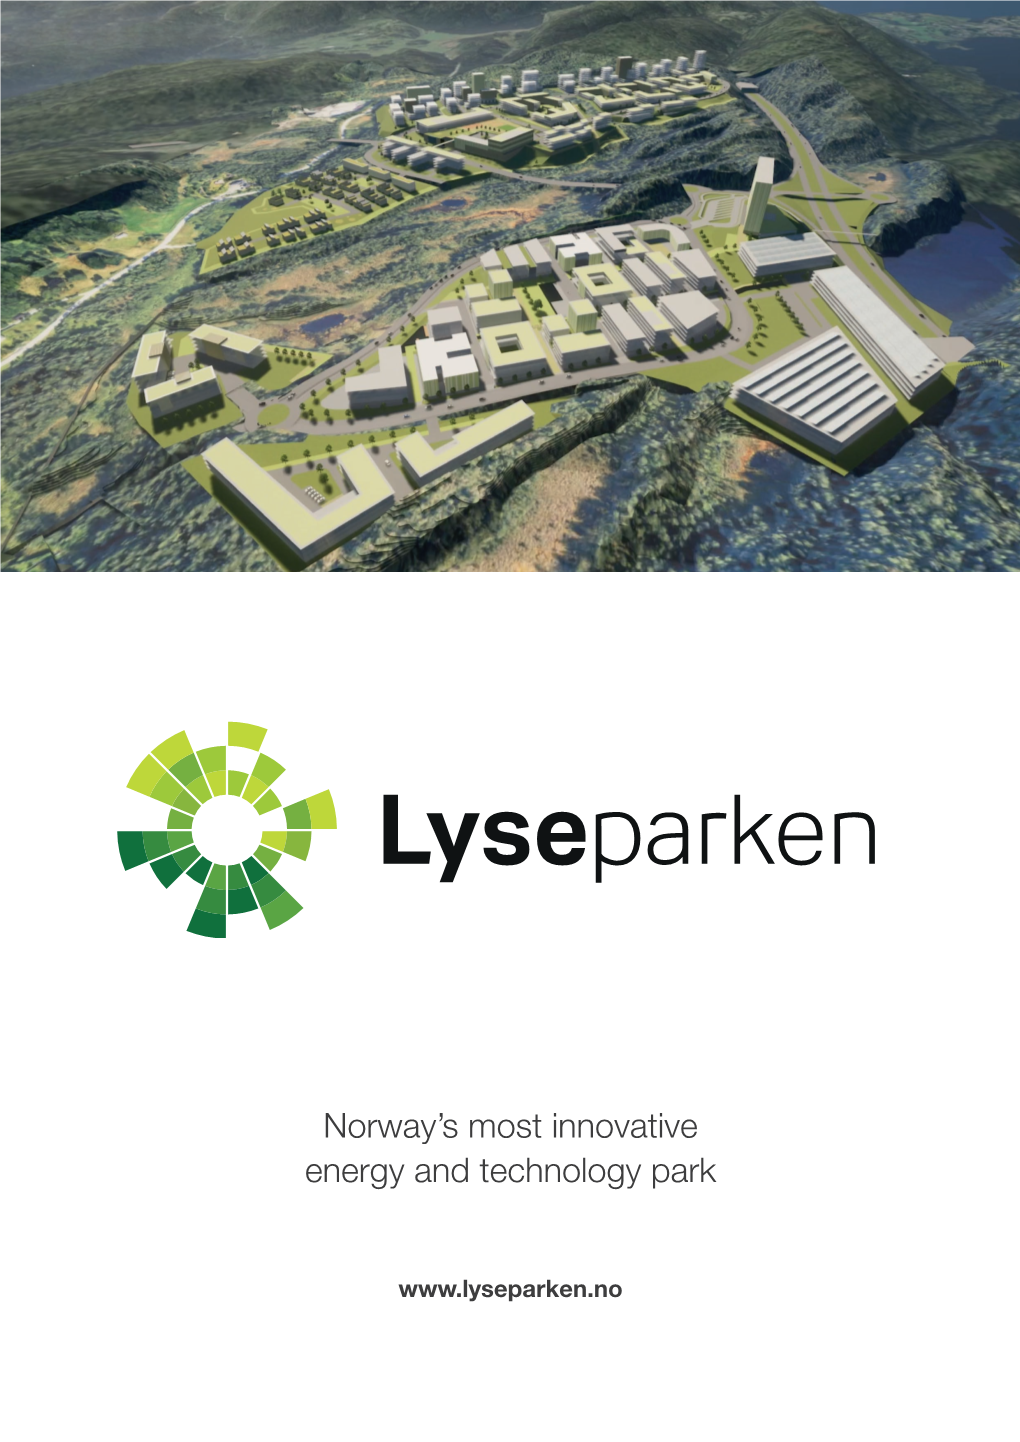 Lyseparken.No – 125 Acres of Approved Commercial Area and Opportunities for Expansion of 185 Acres, Immediate Proximity to 162,000 Employees in Bergen Region